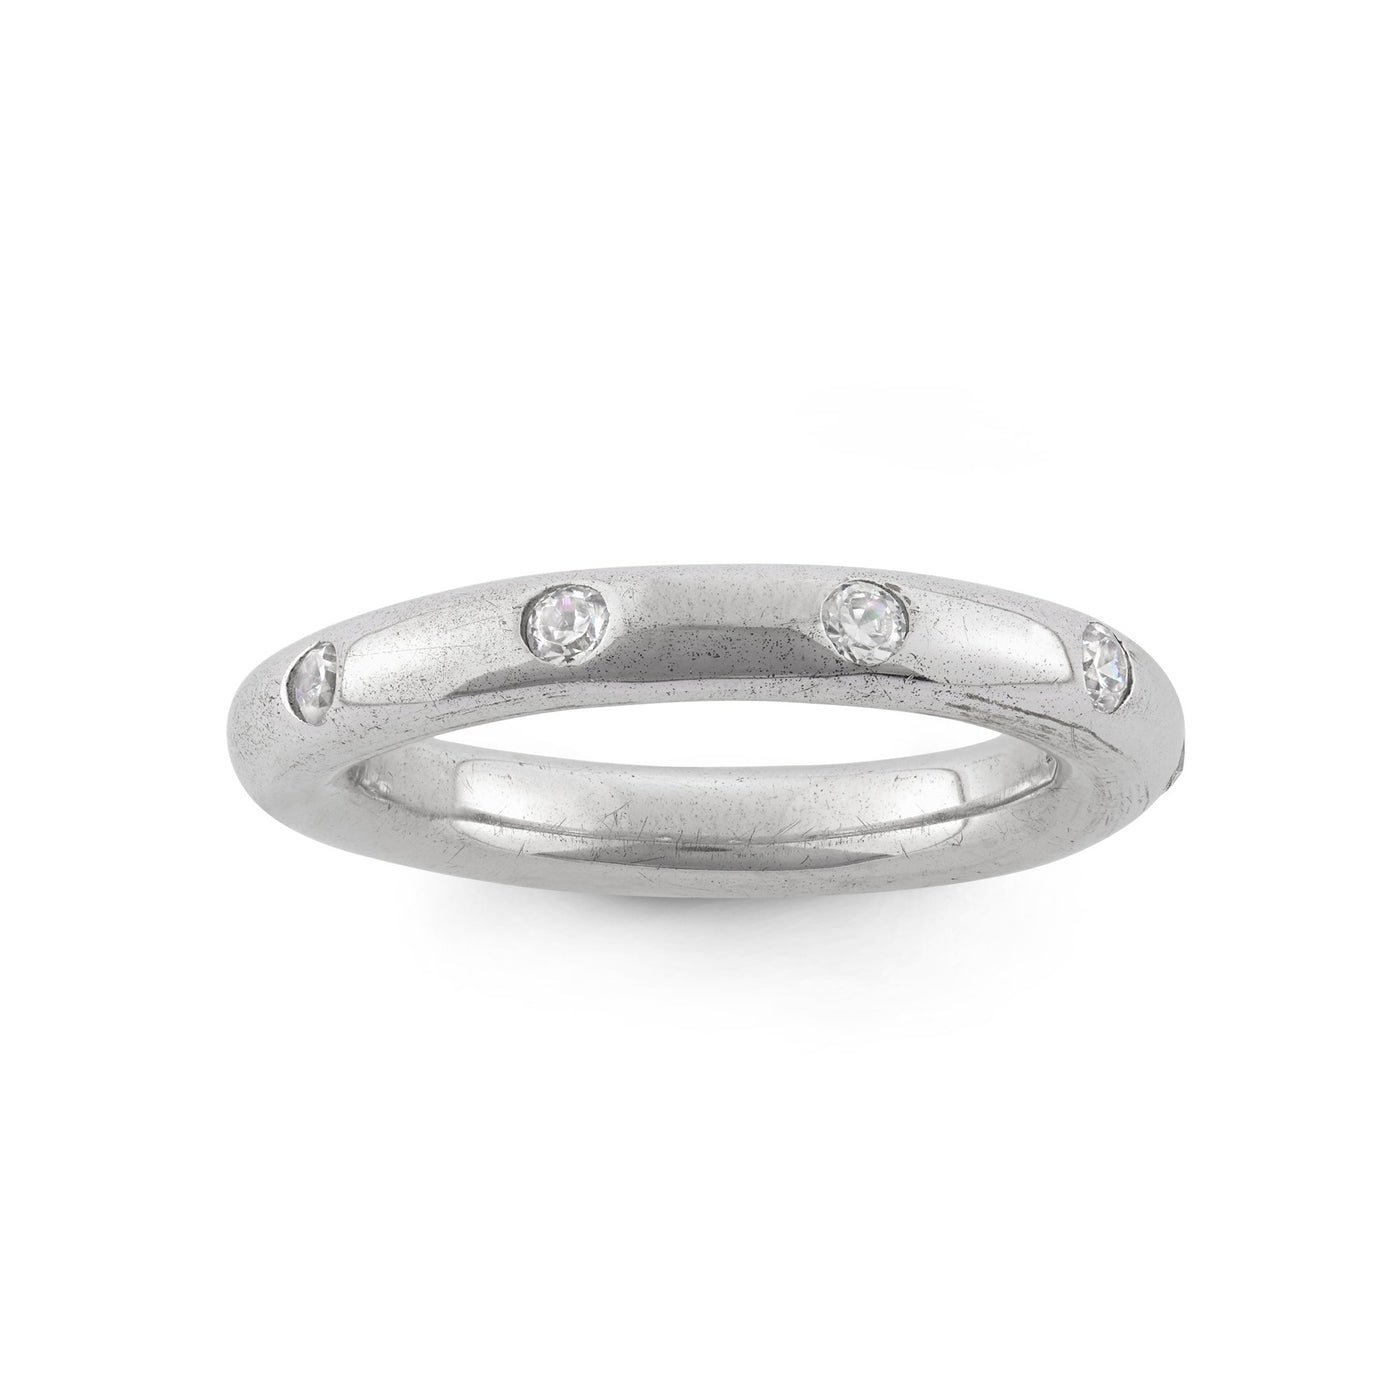 Sterling Silver Spinning Ring With Bezel Set White CZ